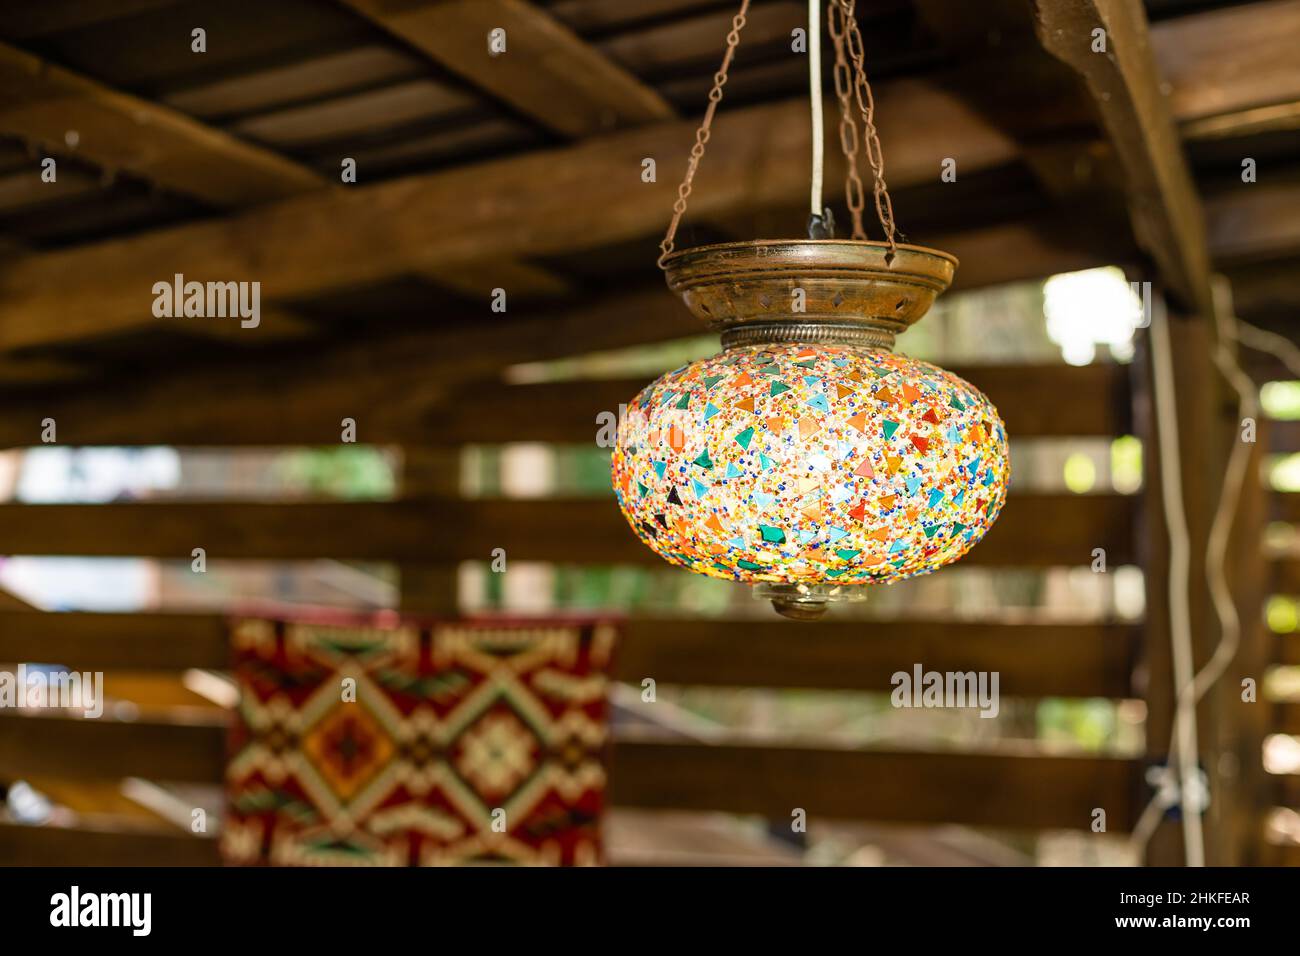 Decorating hanging lantern lamps in wooden interior. Stock Photo